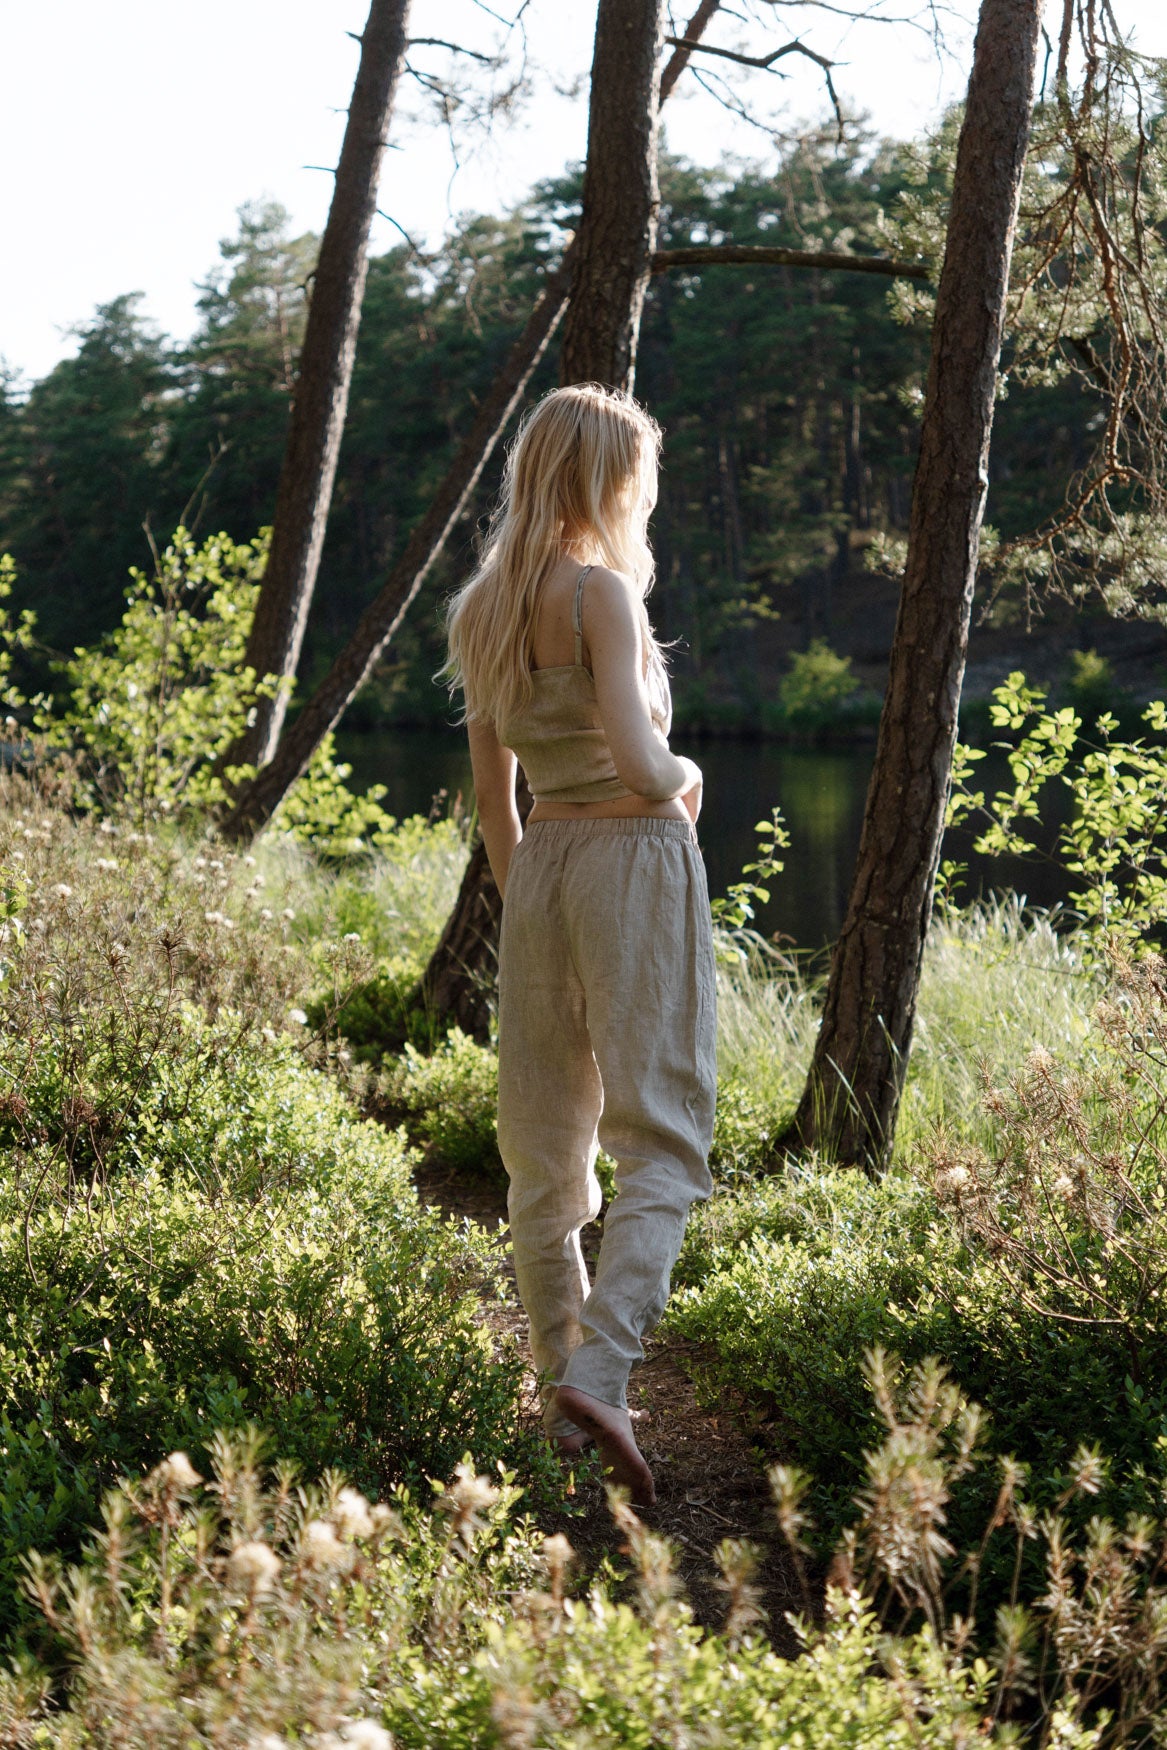 Organic, sustainable beige linen pants and top that can be worn as a loungewear, pajamas or sweatpants with a top. These pants are natural, comfortable, soft and pure. These pants are a conscious and healthy choice for your body and environment. Handmade in the North.